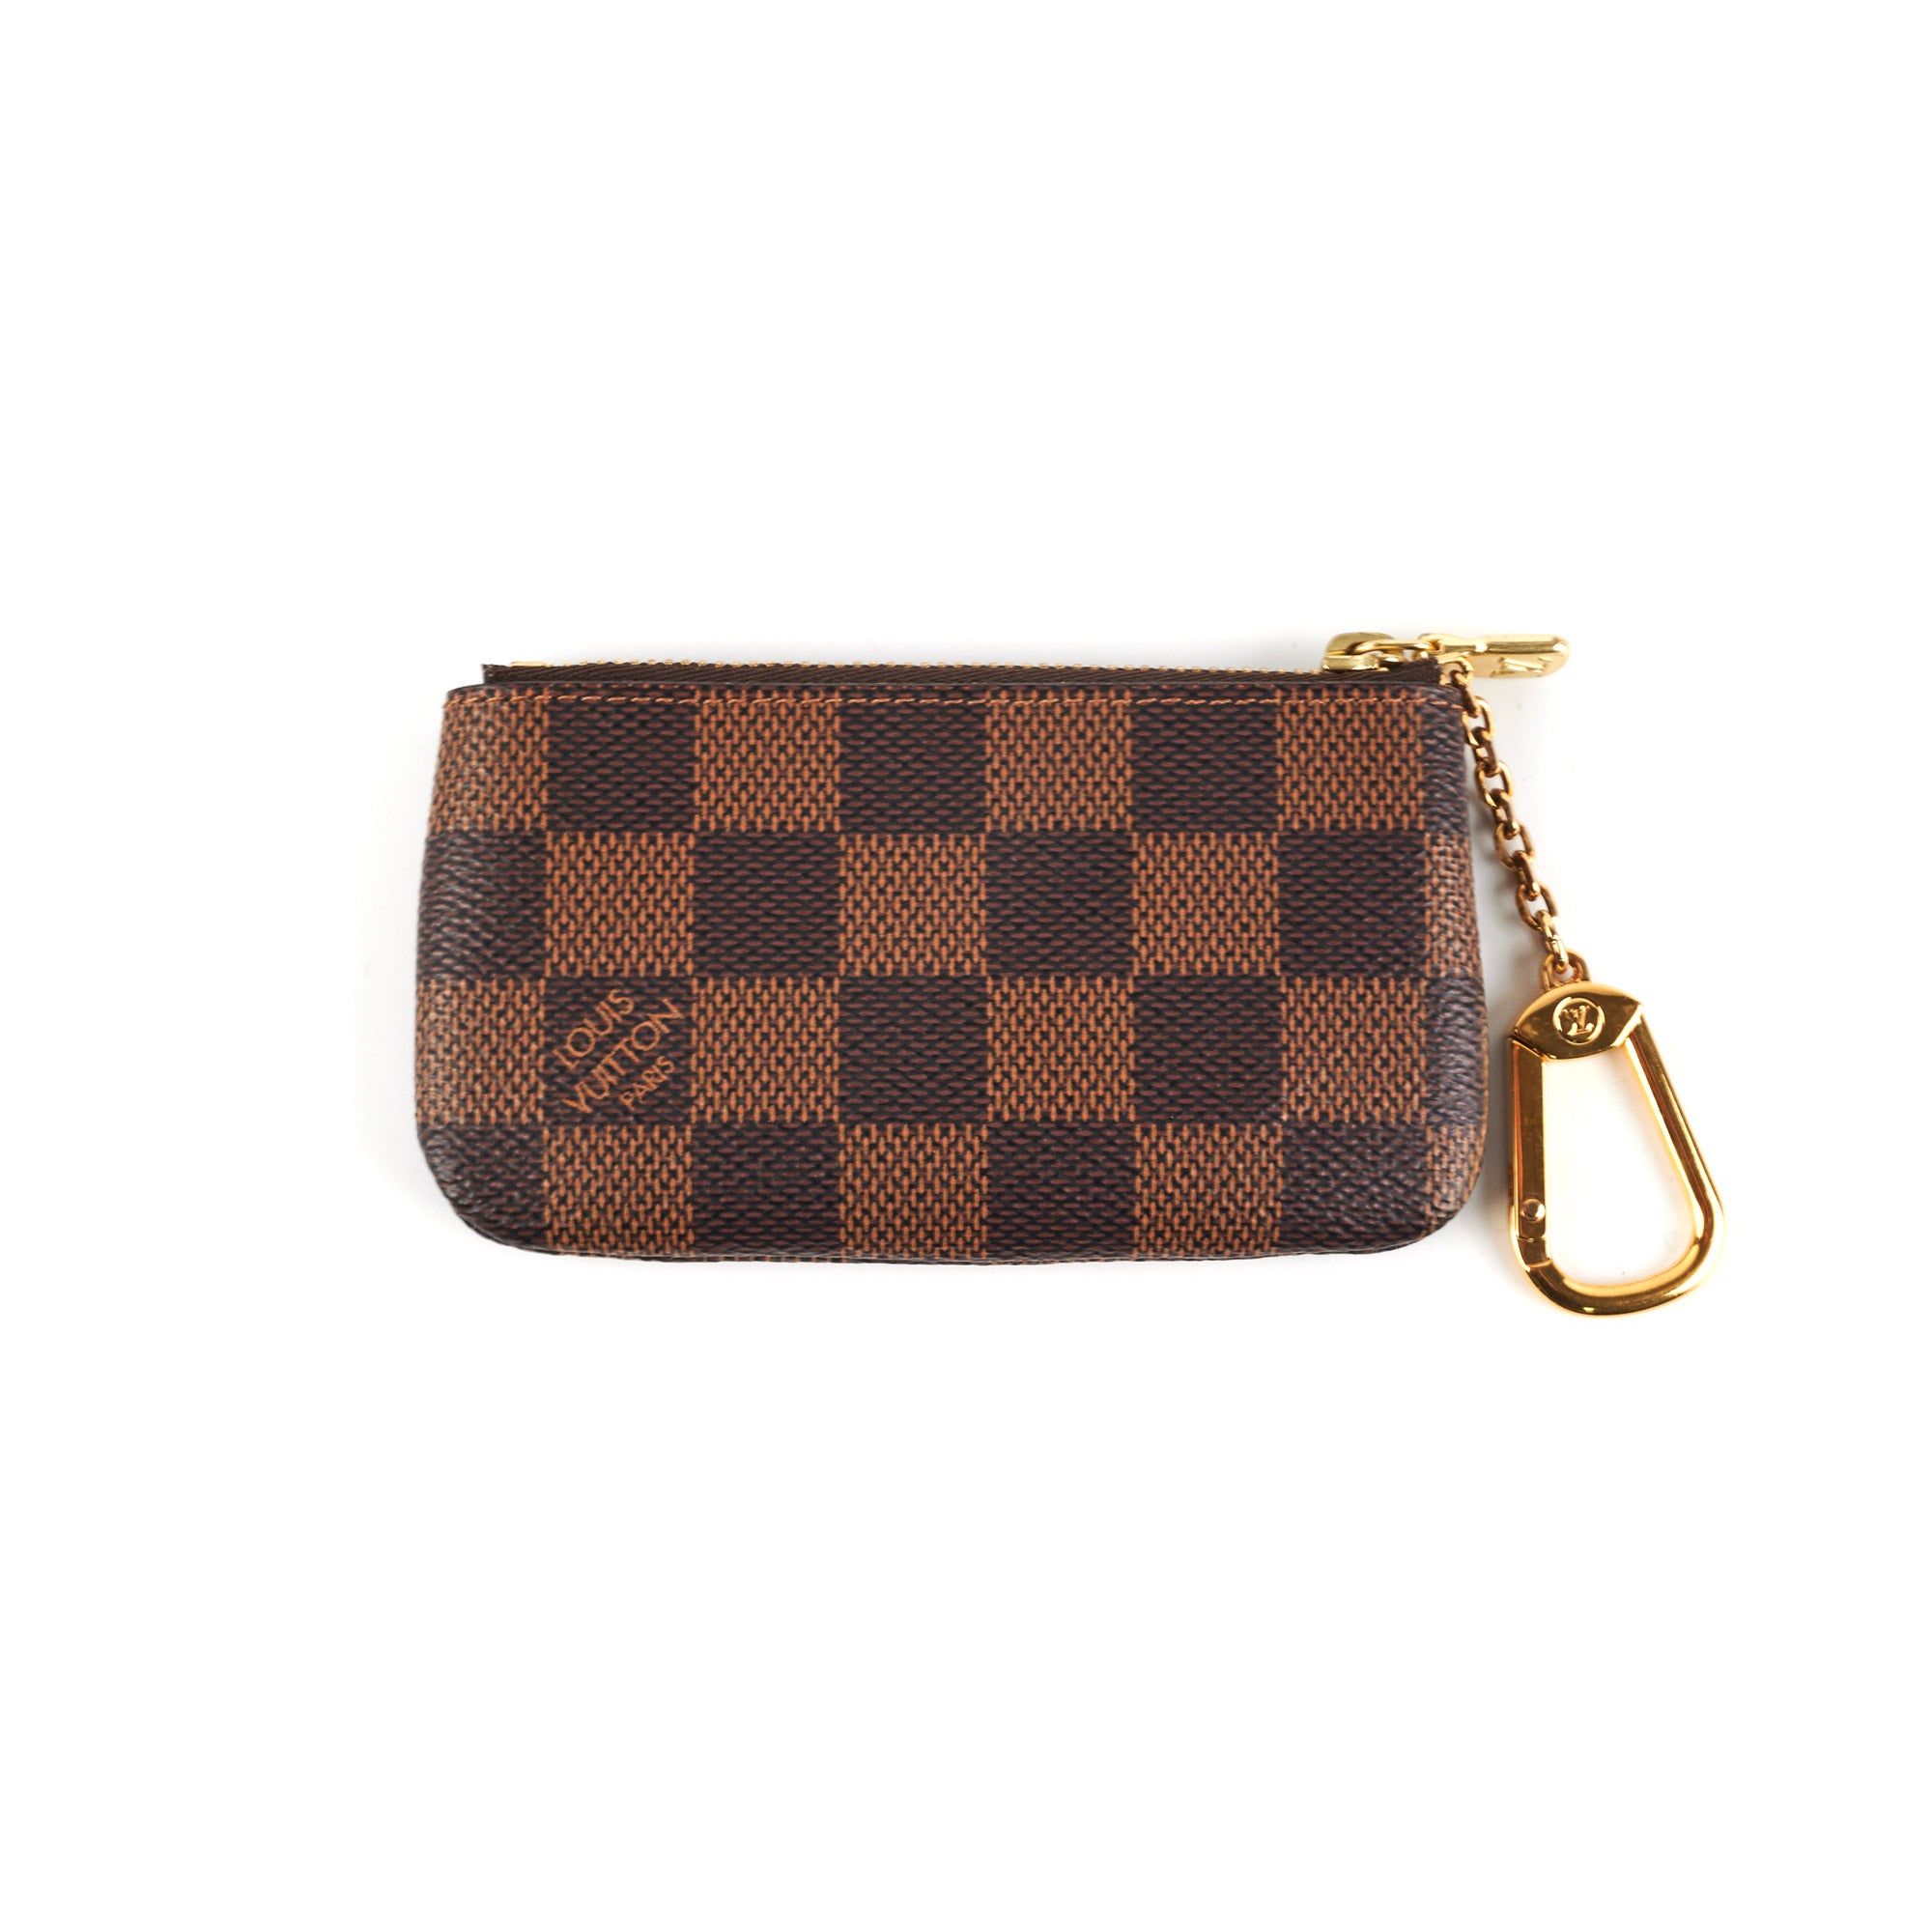 LOUIS VUITTON KEY POUCH IN DAMIER GRAPHITE - WHAT FITS INSIDE